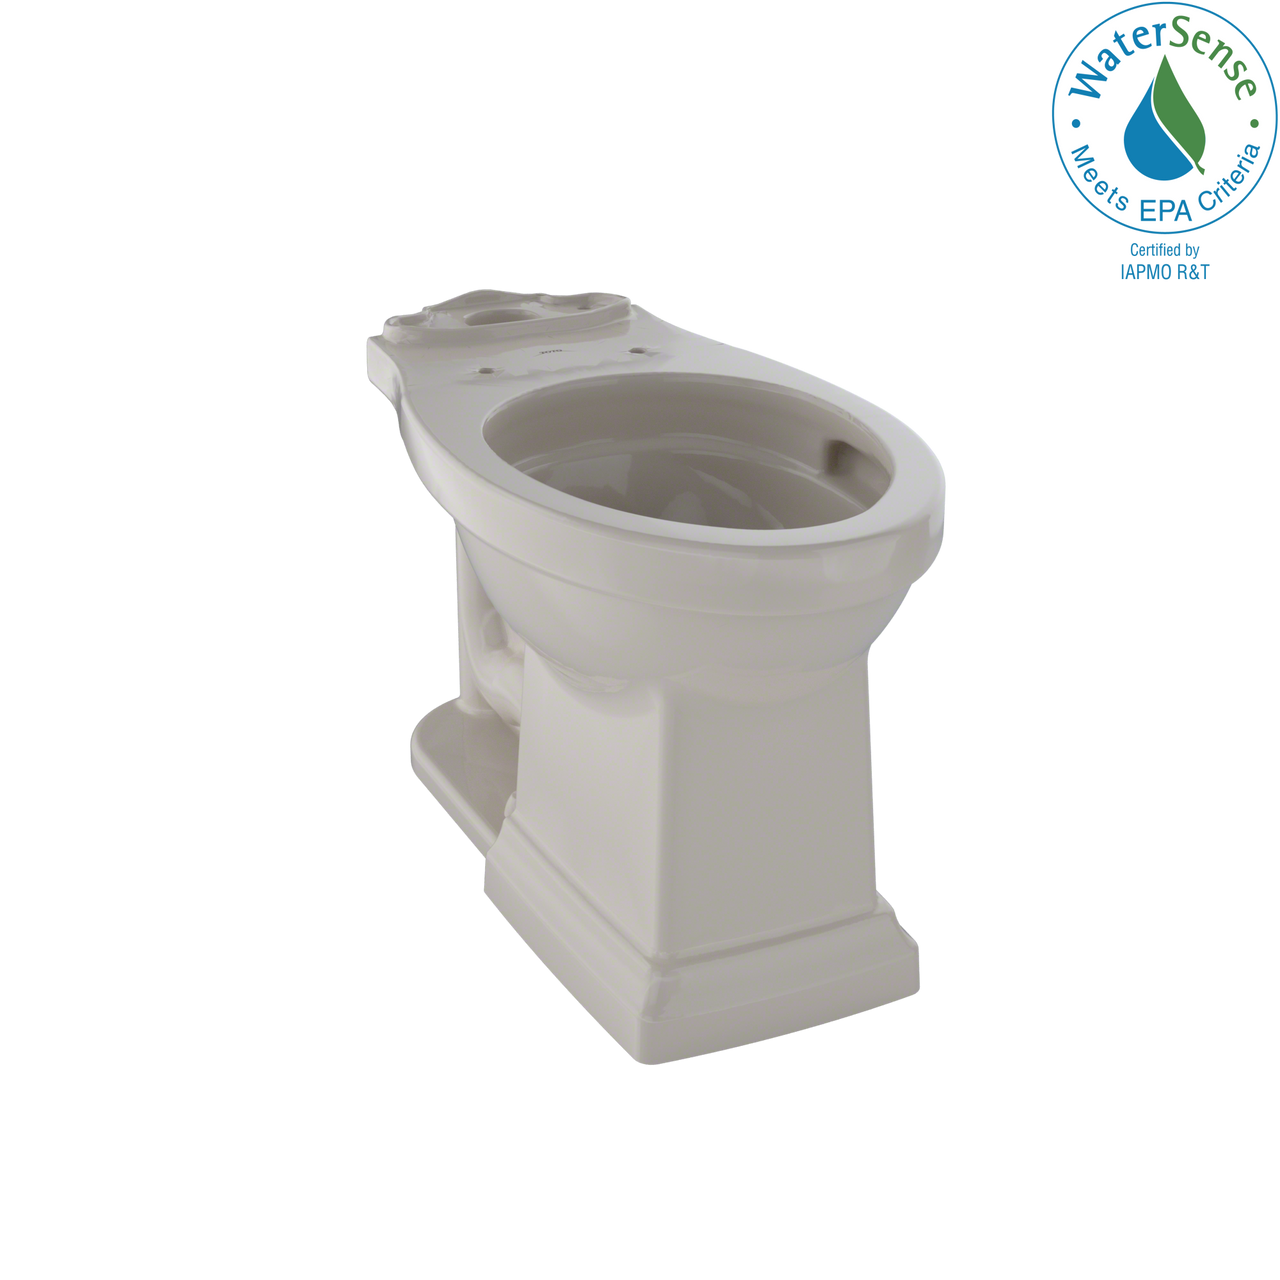 TOTO Promenade II Universal Height Toilet Bowl with CeFiONtect,  - C404CUFG#03 - BNGBath